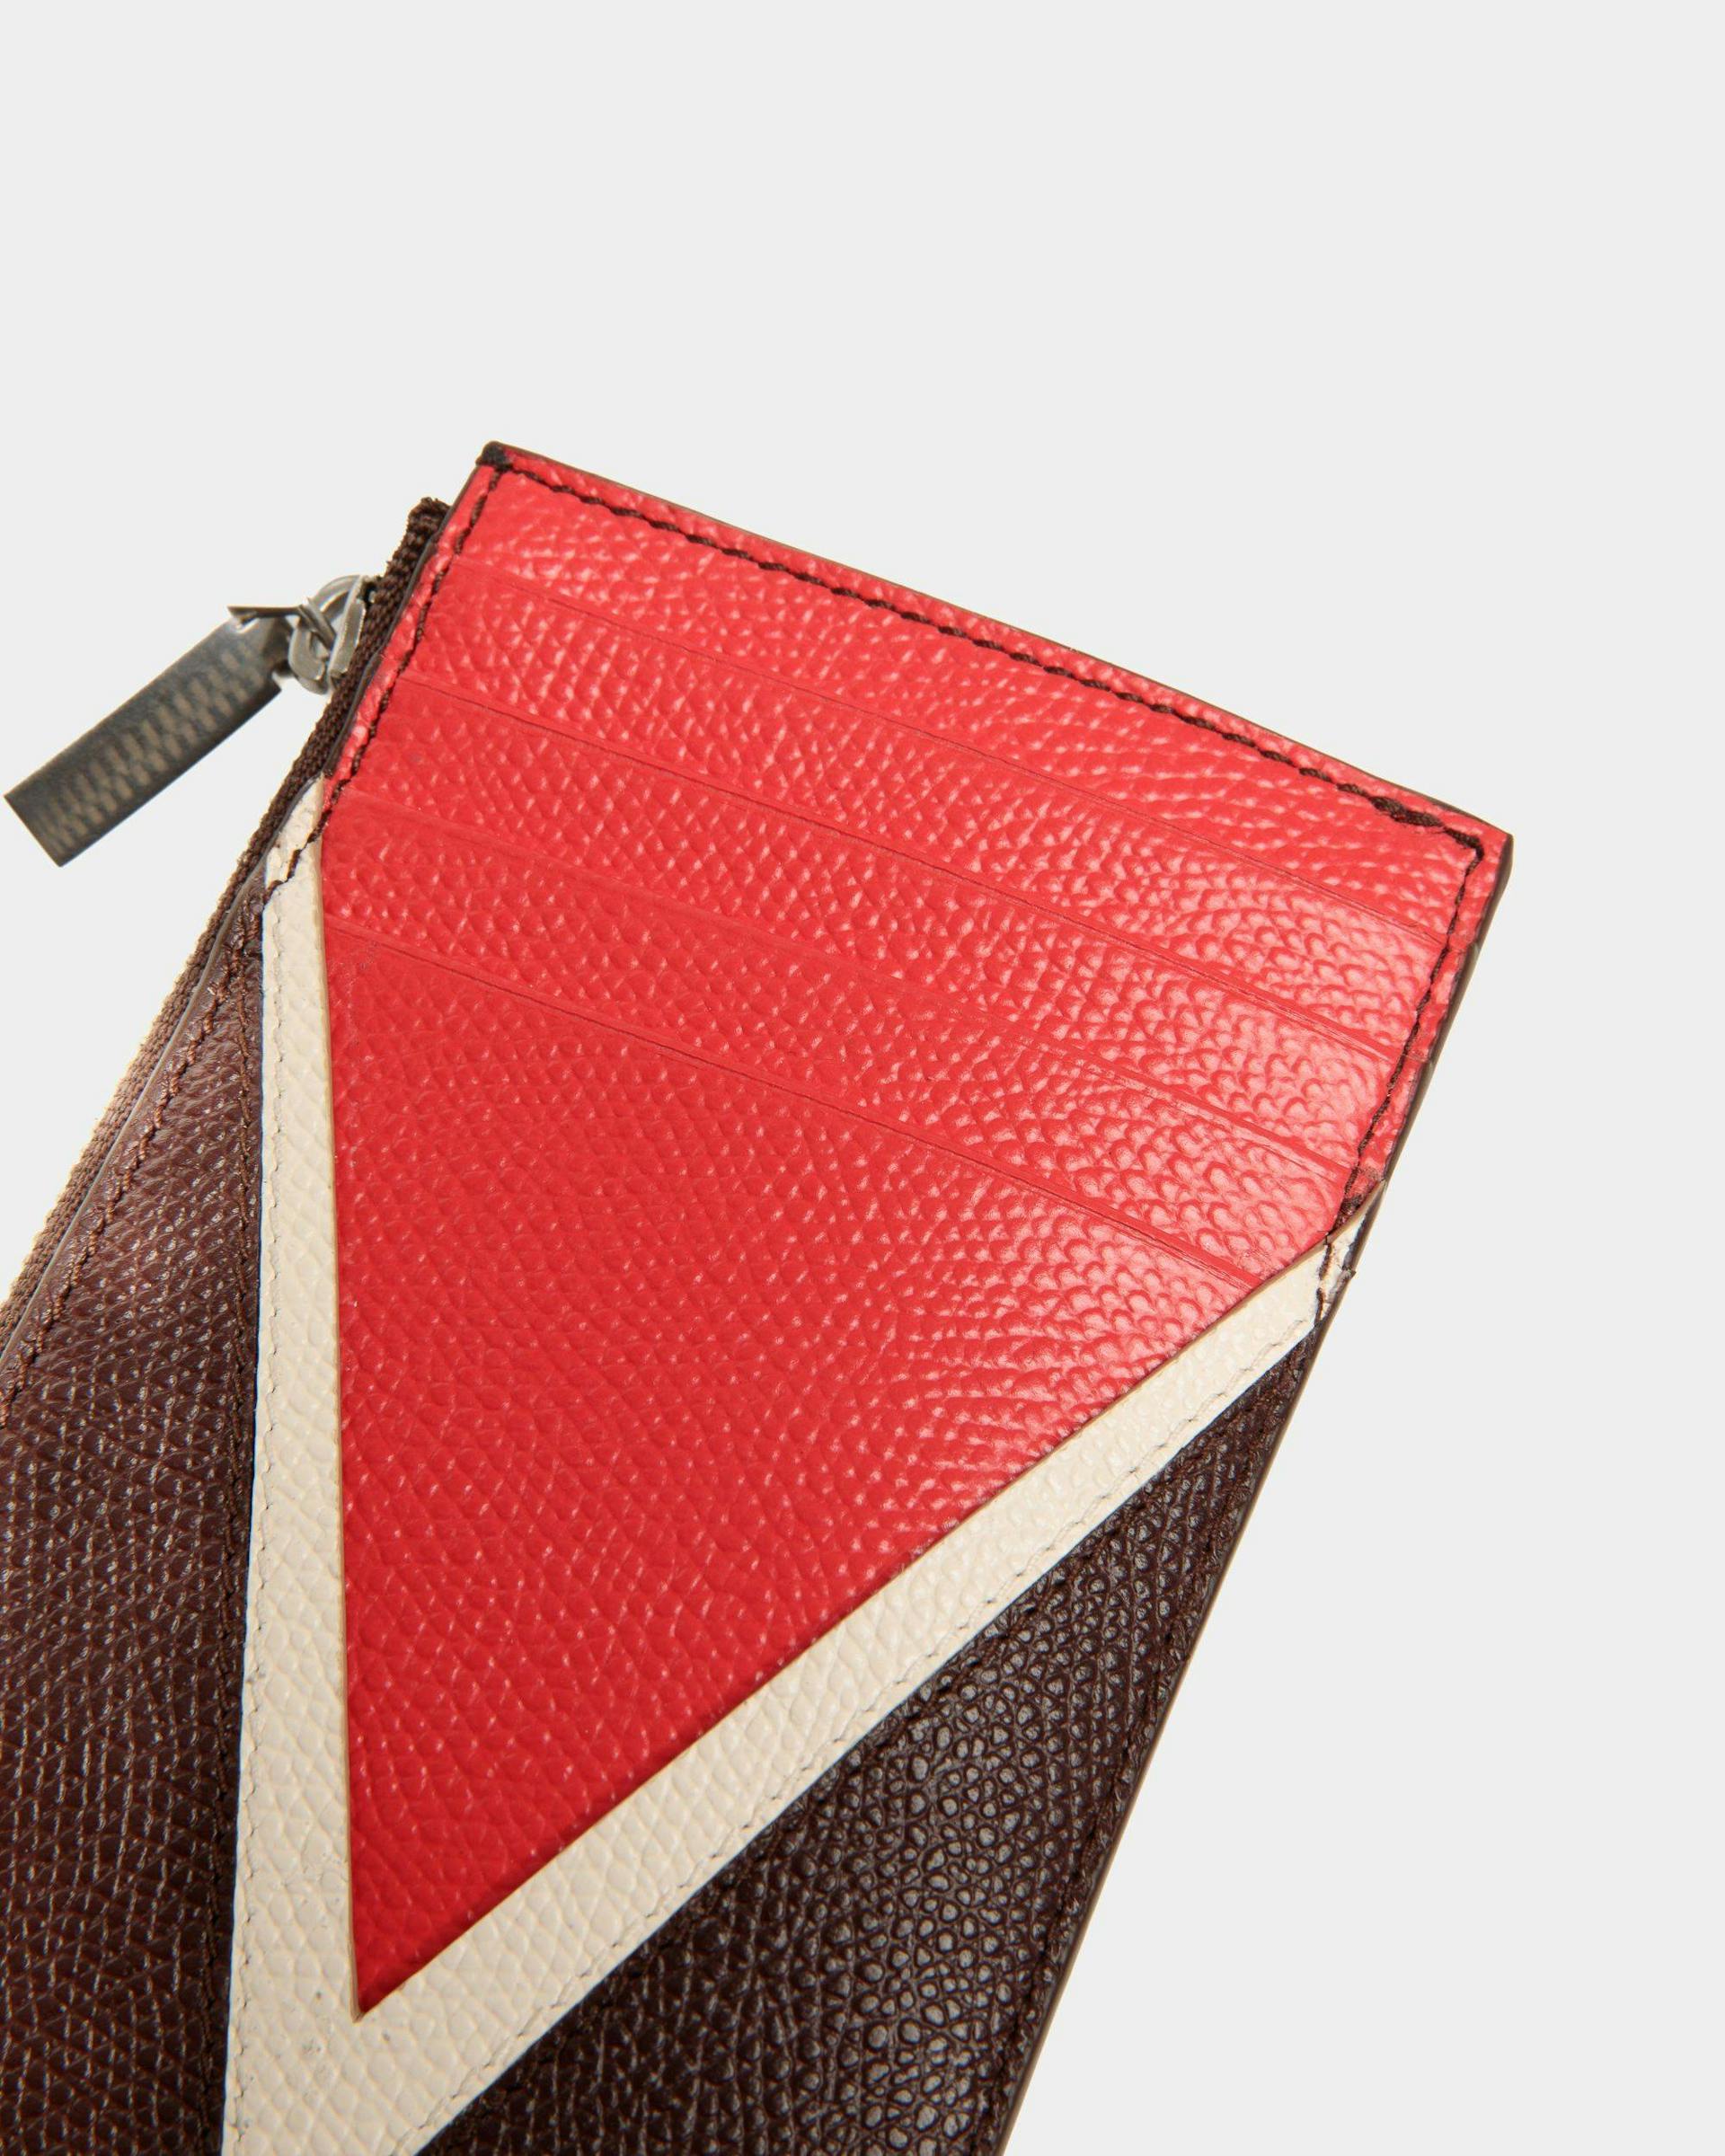 Men's Flag Coin Card Holder In Chestnut Brown And Red Embossed Leather | Bally | Still Life Detail